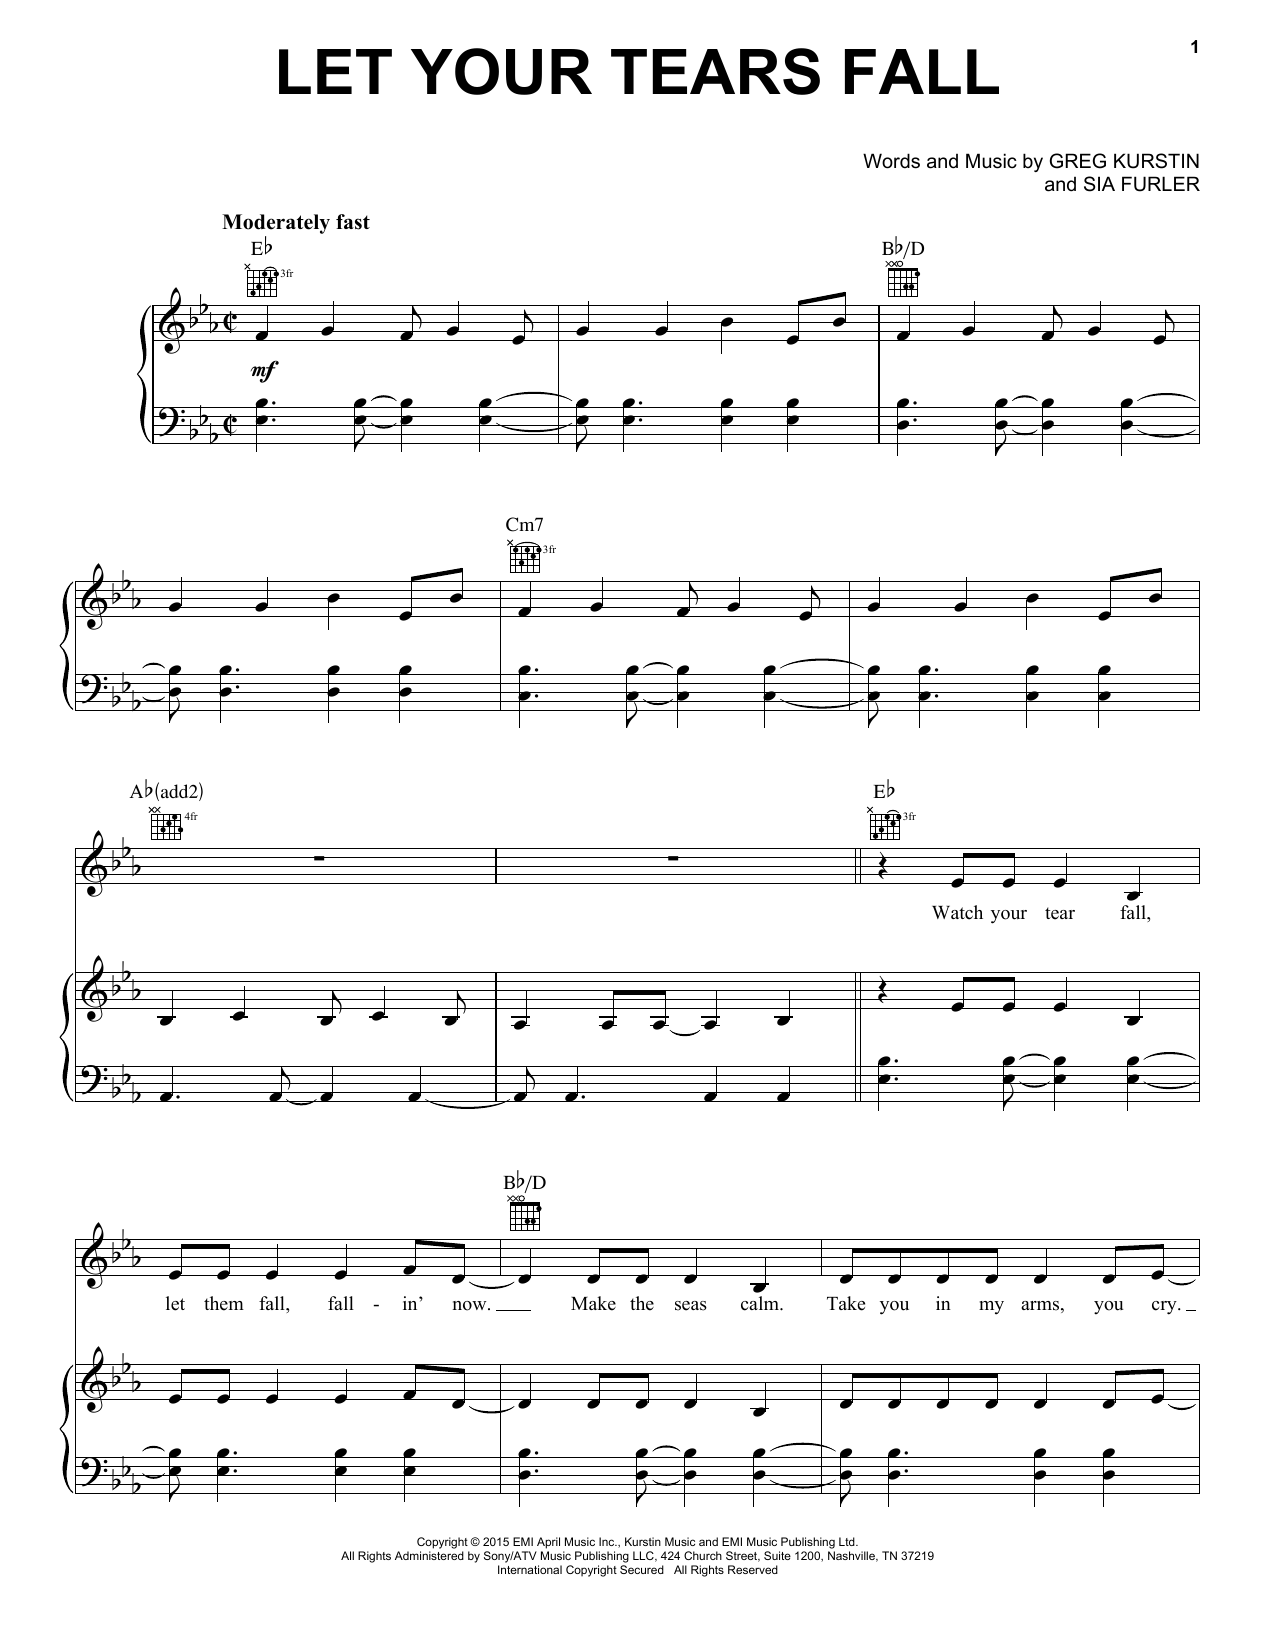 Download Kelly Clarkson Let Your Tears Fall Sheet Music